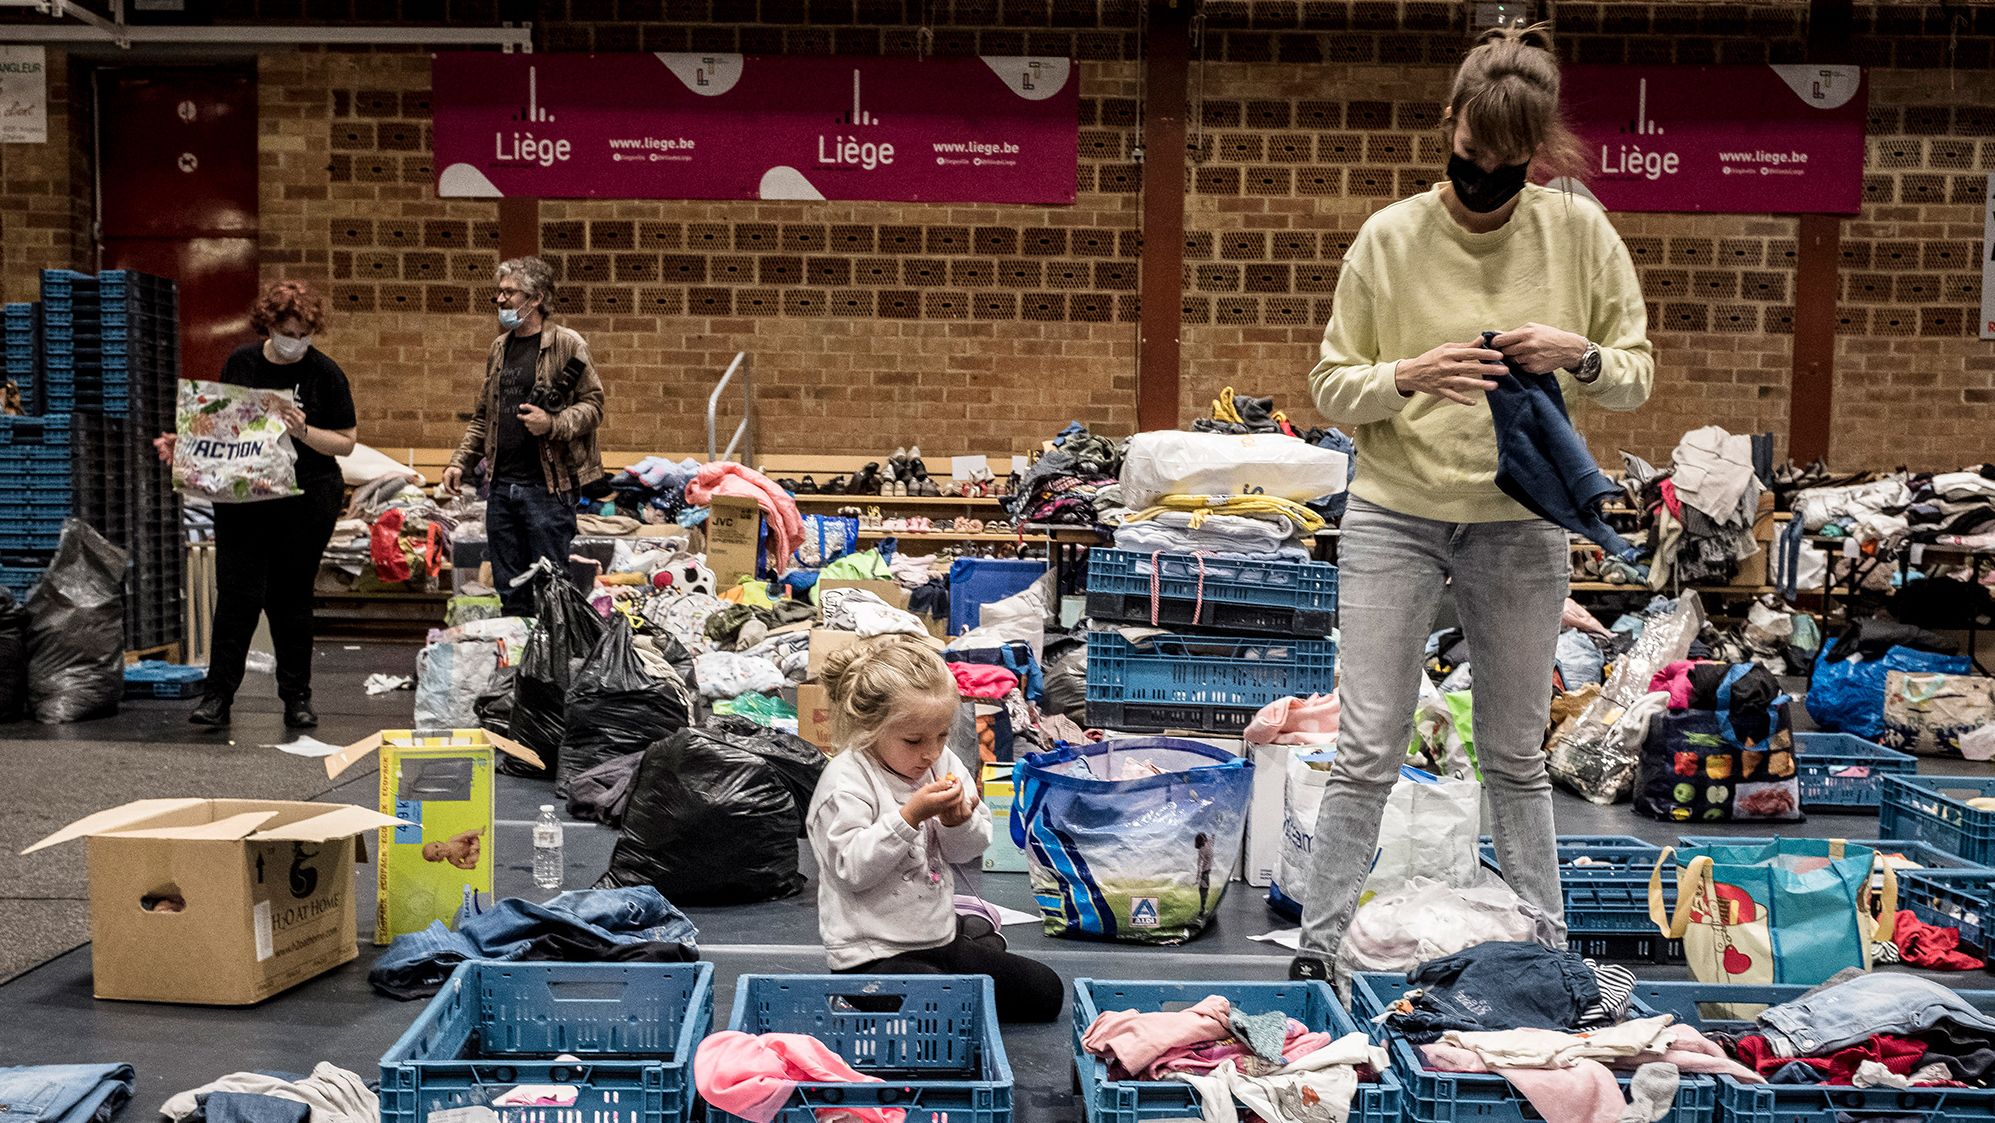 A woman sorts through clothing at a shelter in Liege, Belgium, on Friday.